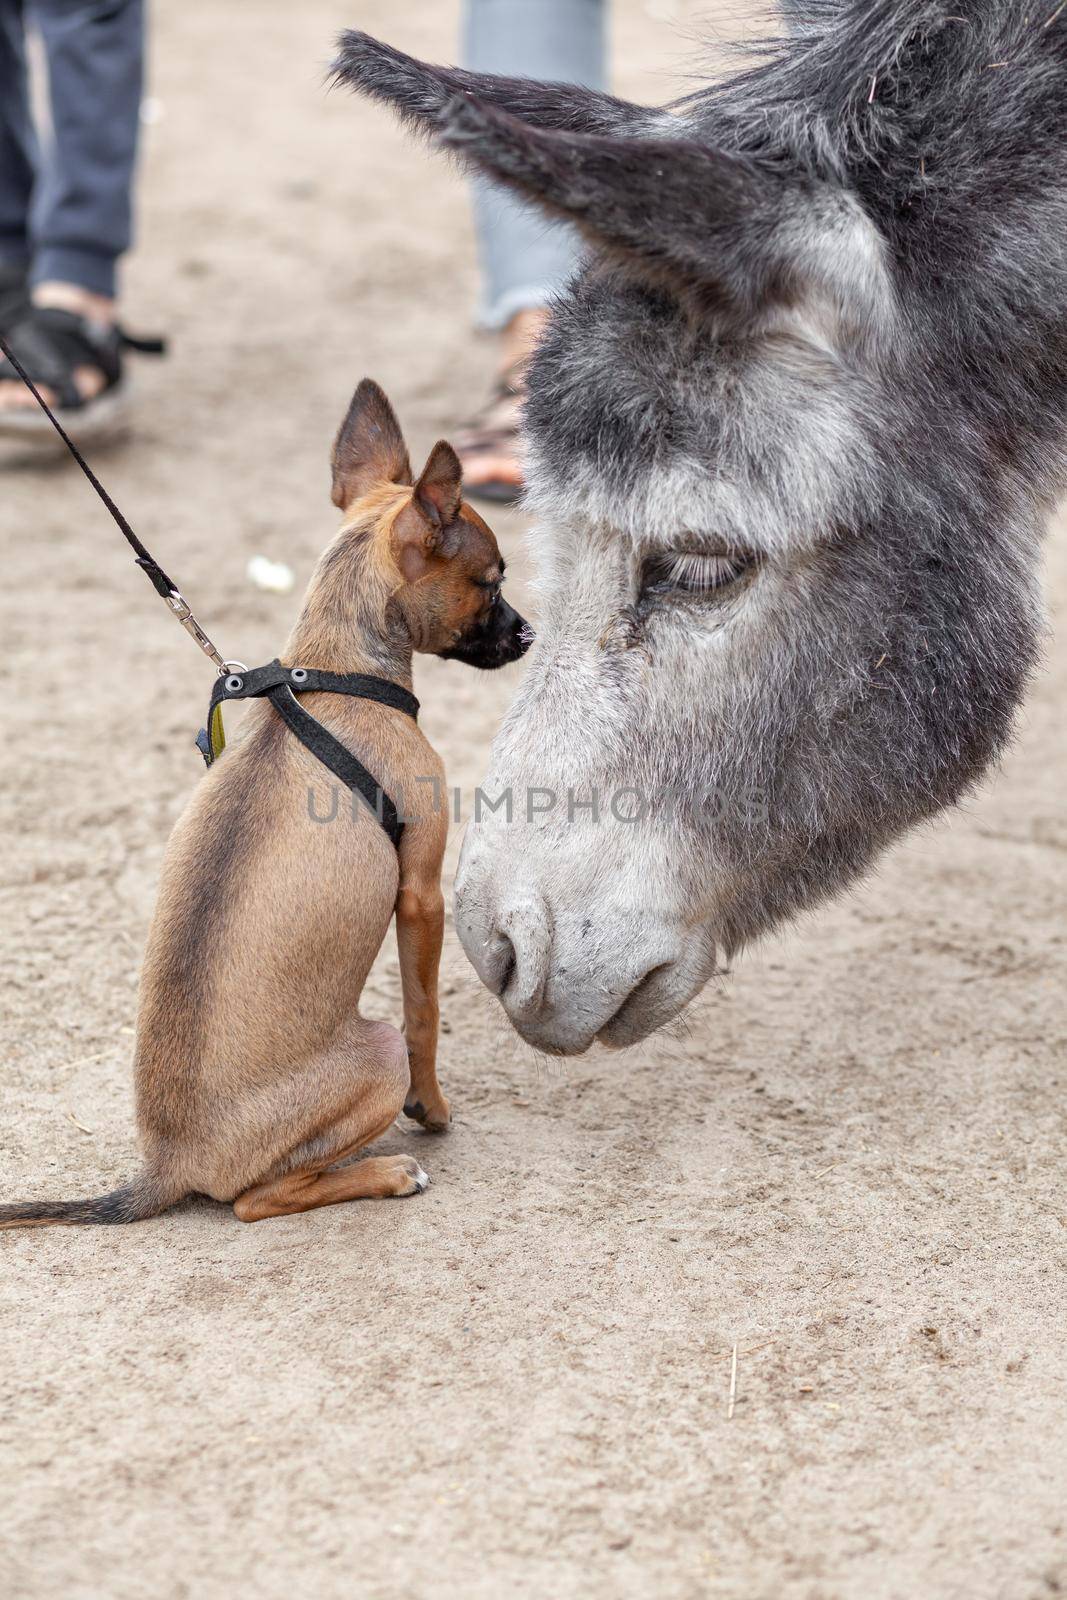 A small brown dog is getting to know and kissing a gray donkey at a donkey farm. Close-up. Toy terrier dog. Rural life with animals.